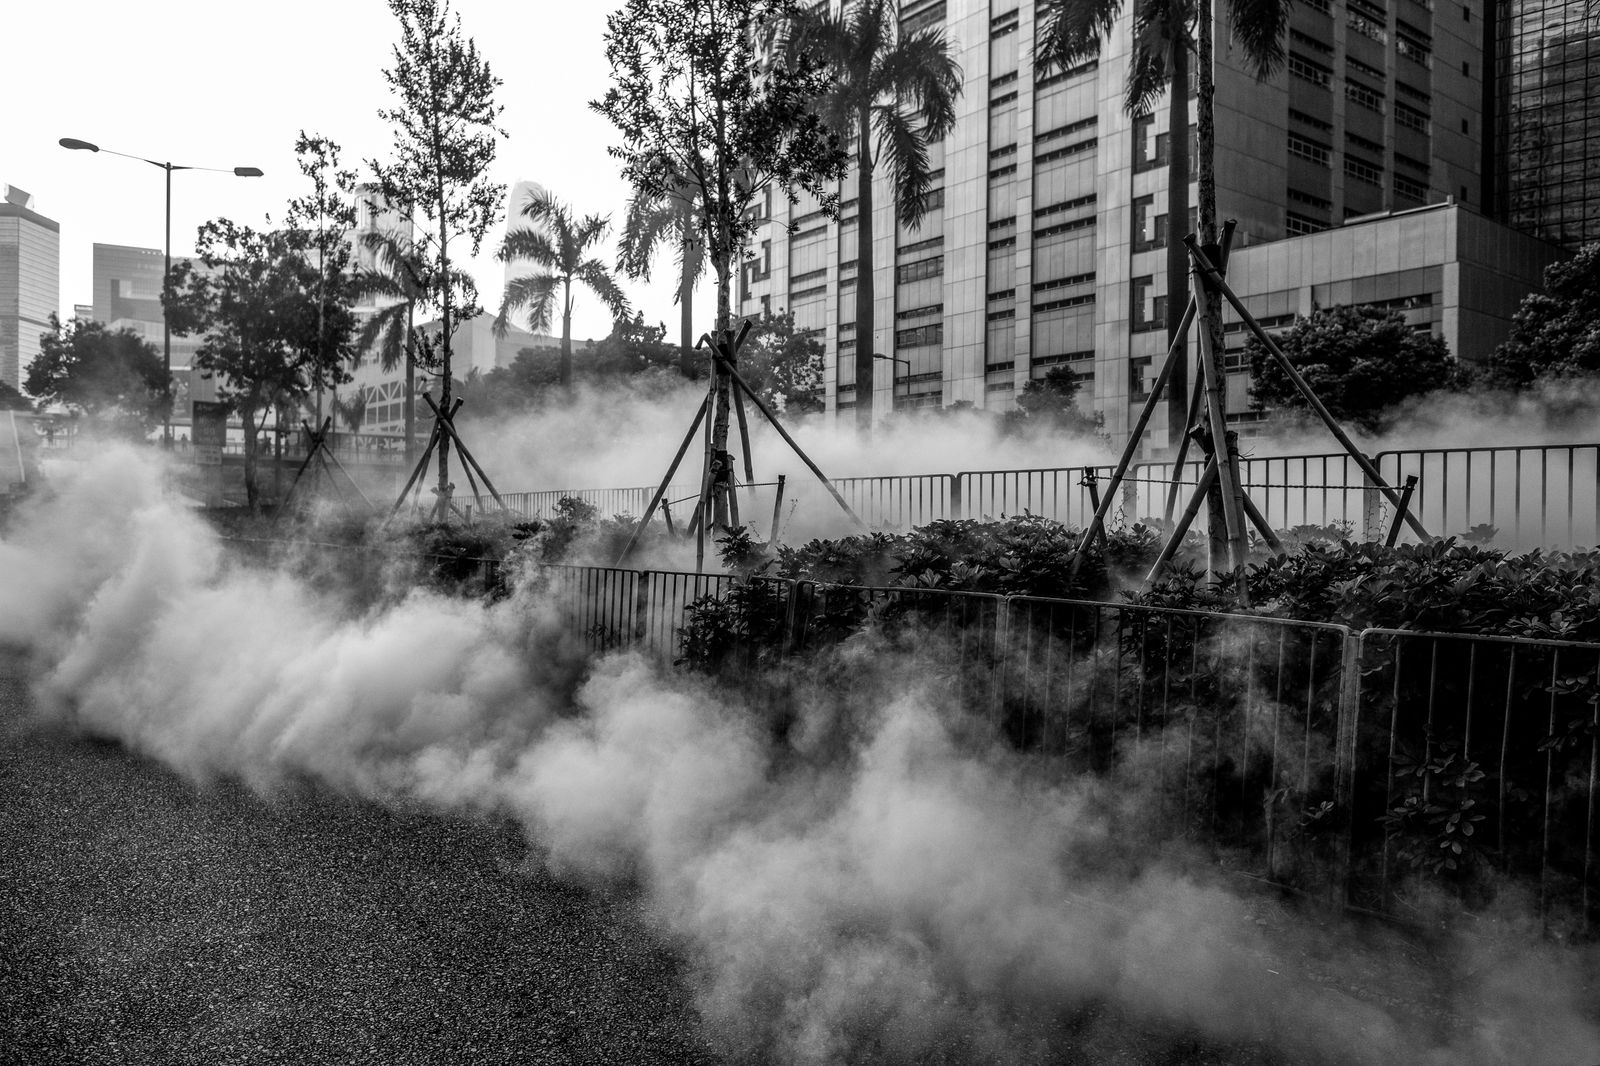 © Tsz Yeung Tsang - Police fire tear gas to disperse protestors in Wan Chai, Hong Kong, October 1, 2019. Tear gas fire on that day: 1667.